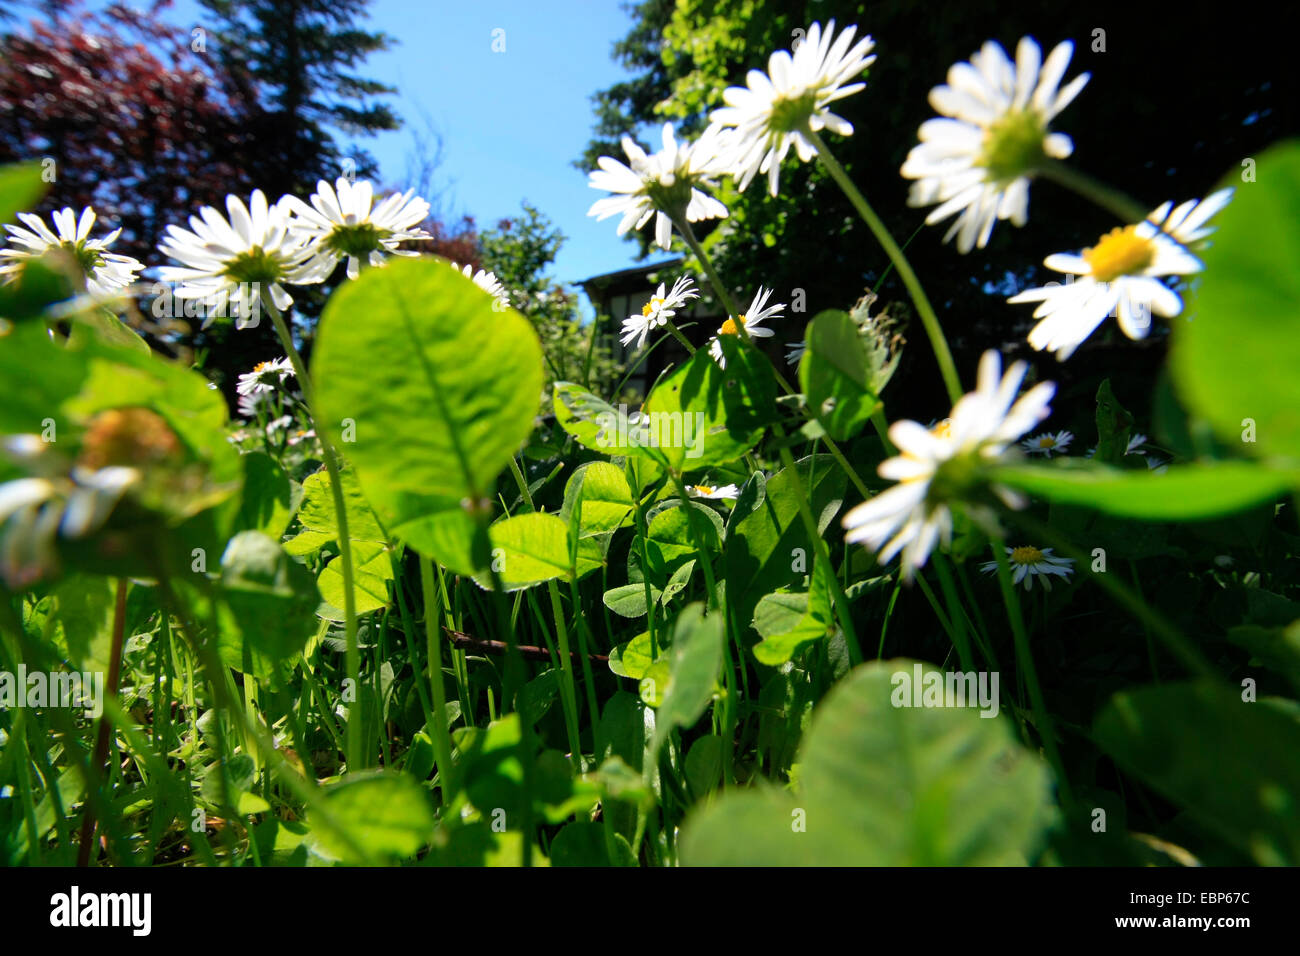 common daisy, lawn daisy, English daisy (Bellis perennis), blooming in a meadow with trefoils, Germany, Saxony Stock Photo